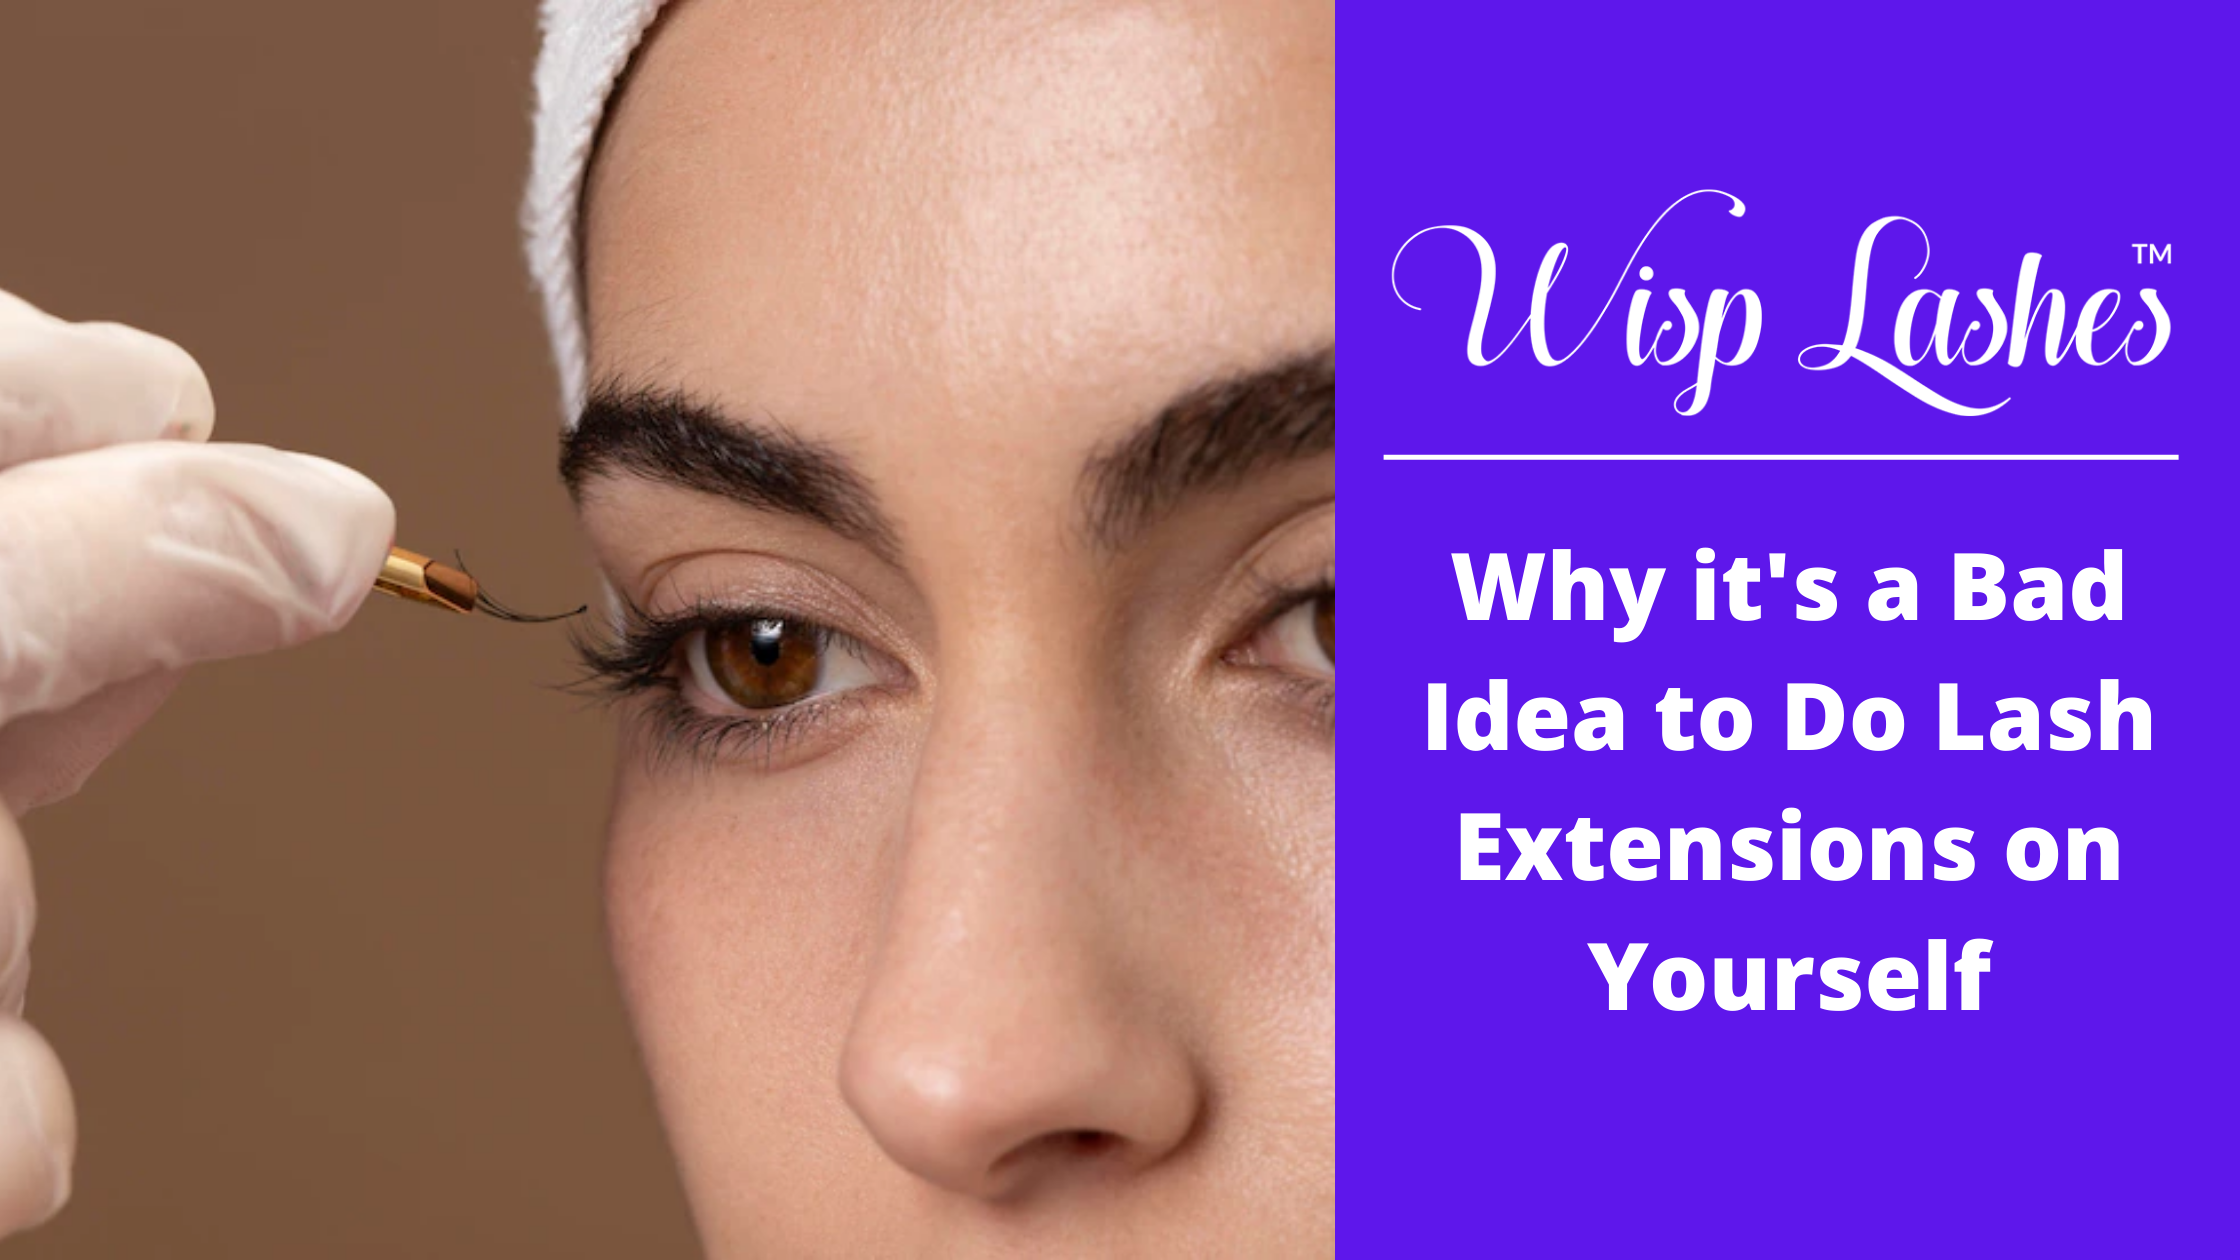 Why it's a Bad Idea to Do Lash Extensions on Yourself